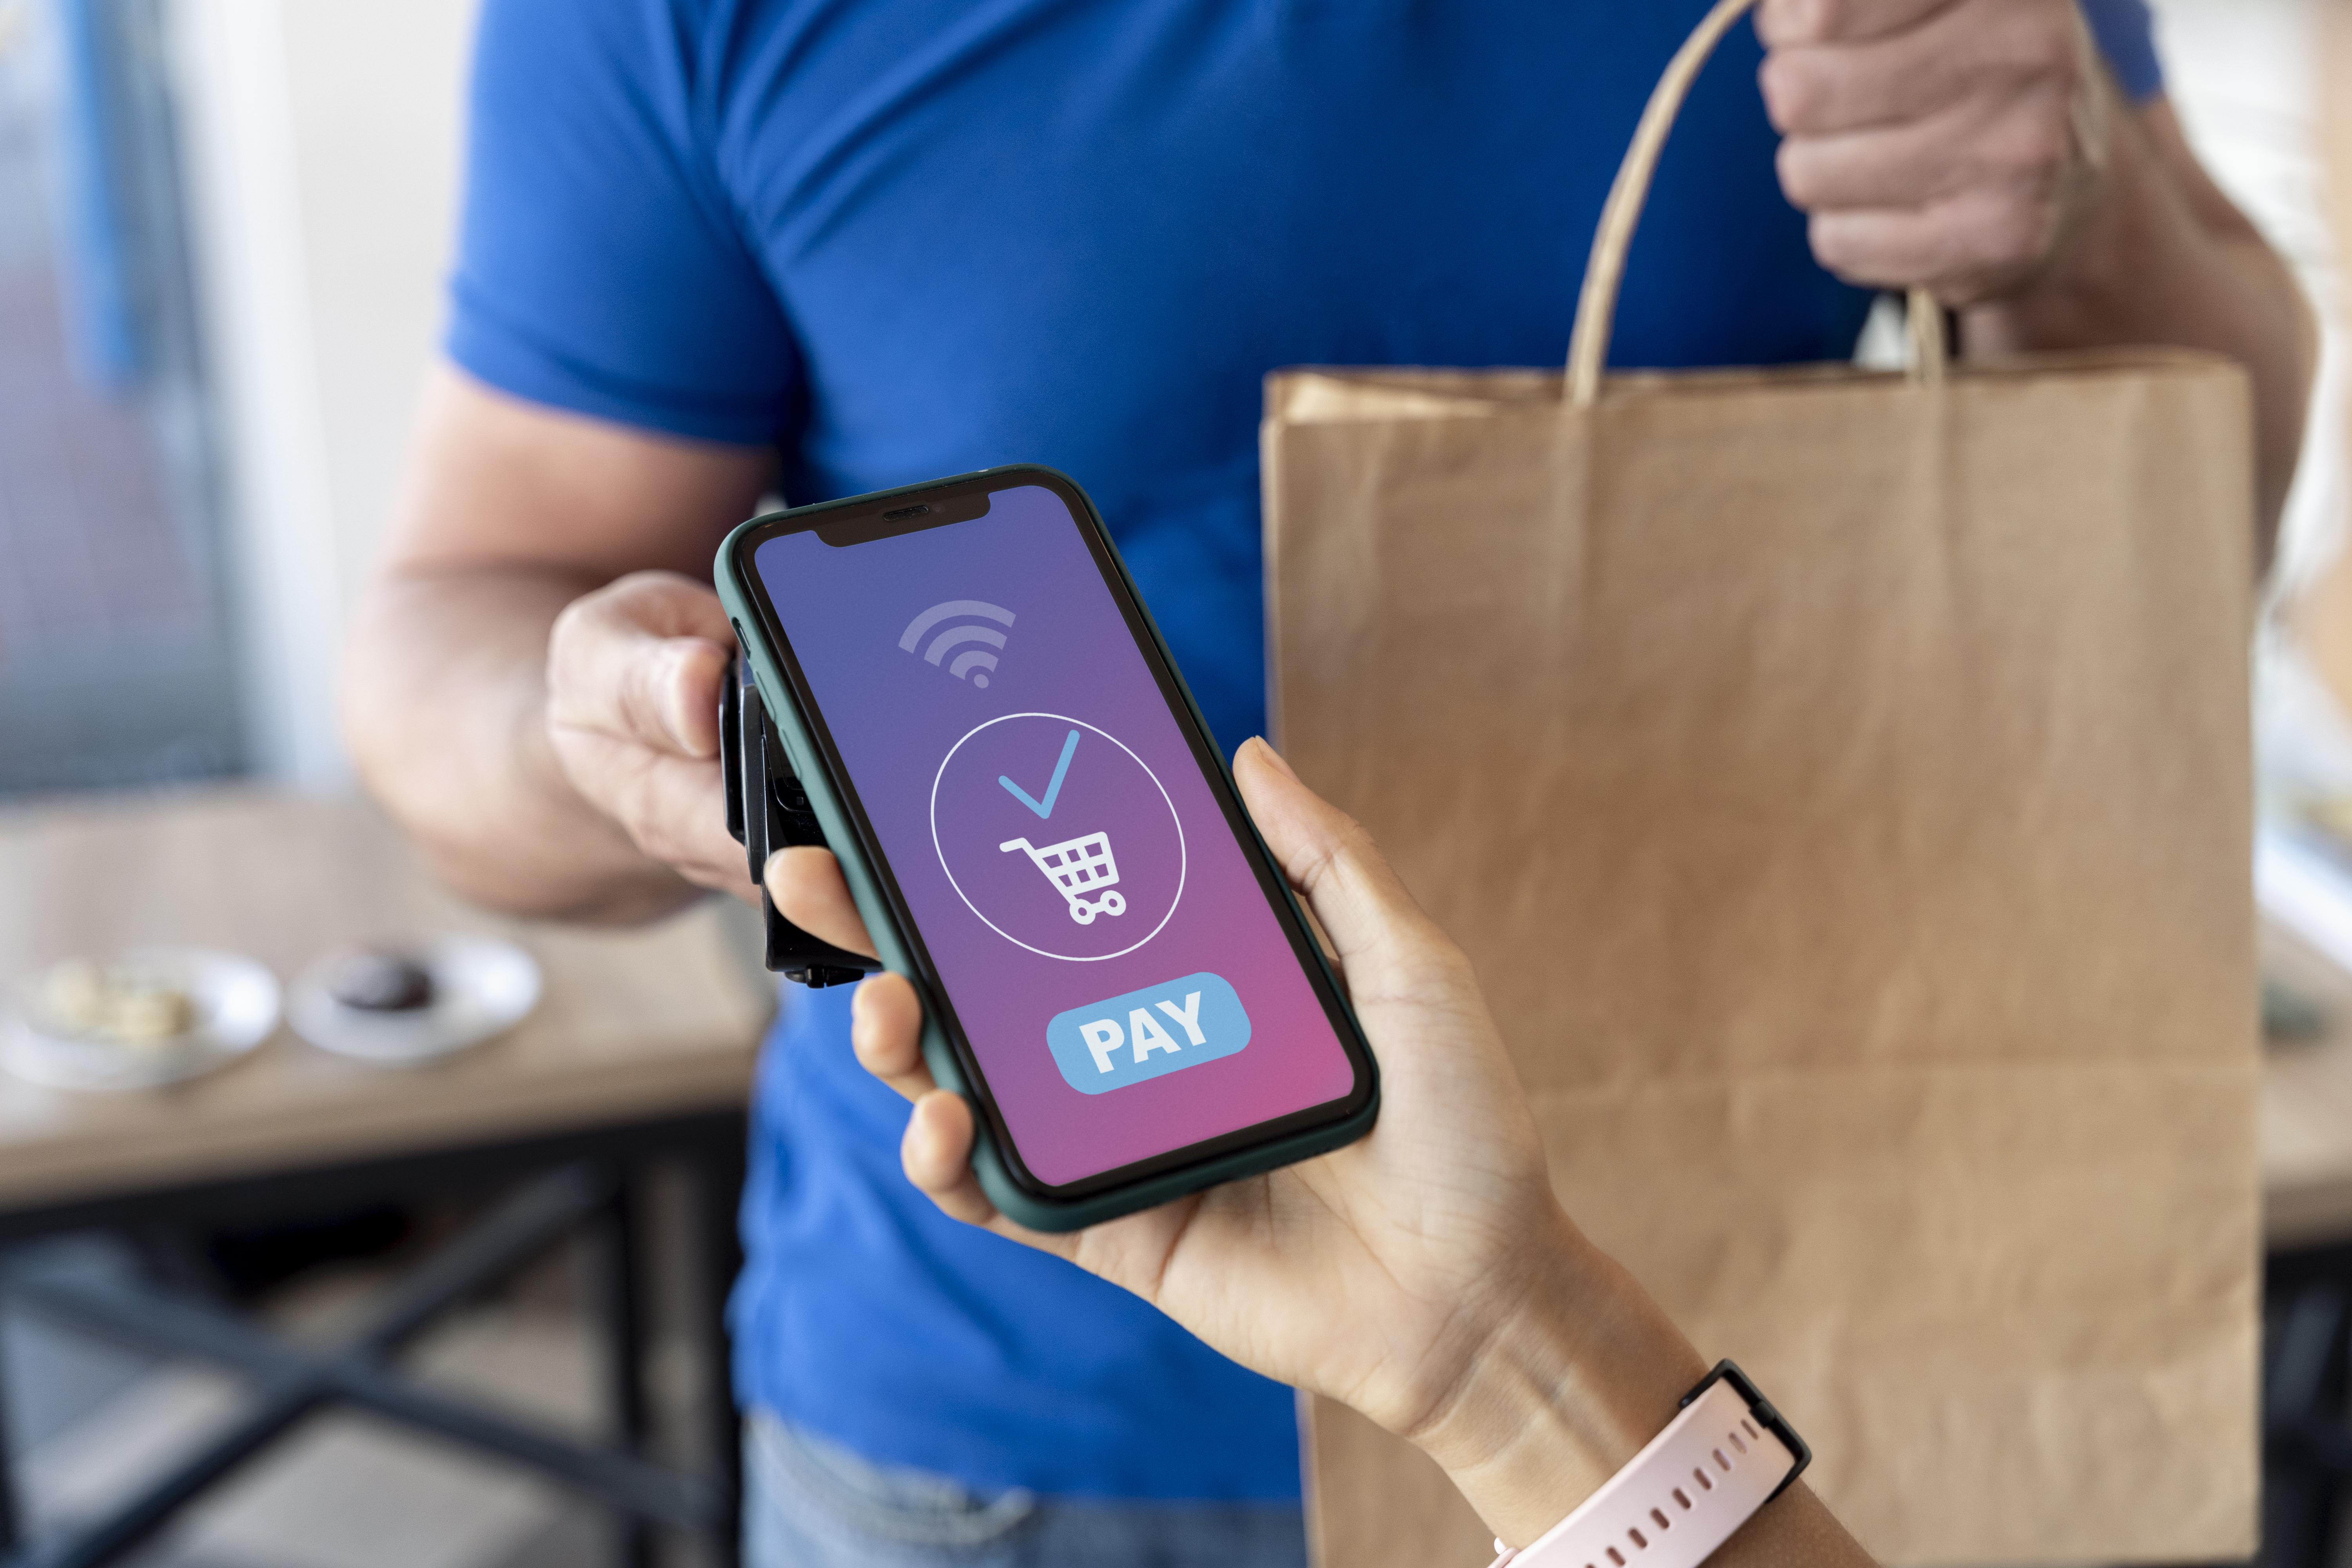 Mobile payment transaction value expected to witness strong growth in Latin America